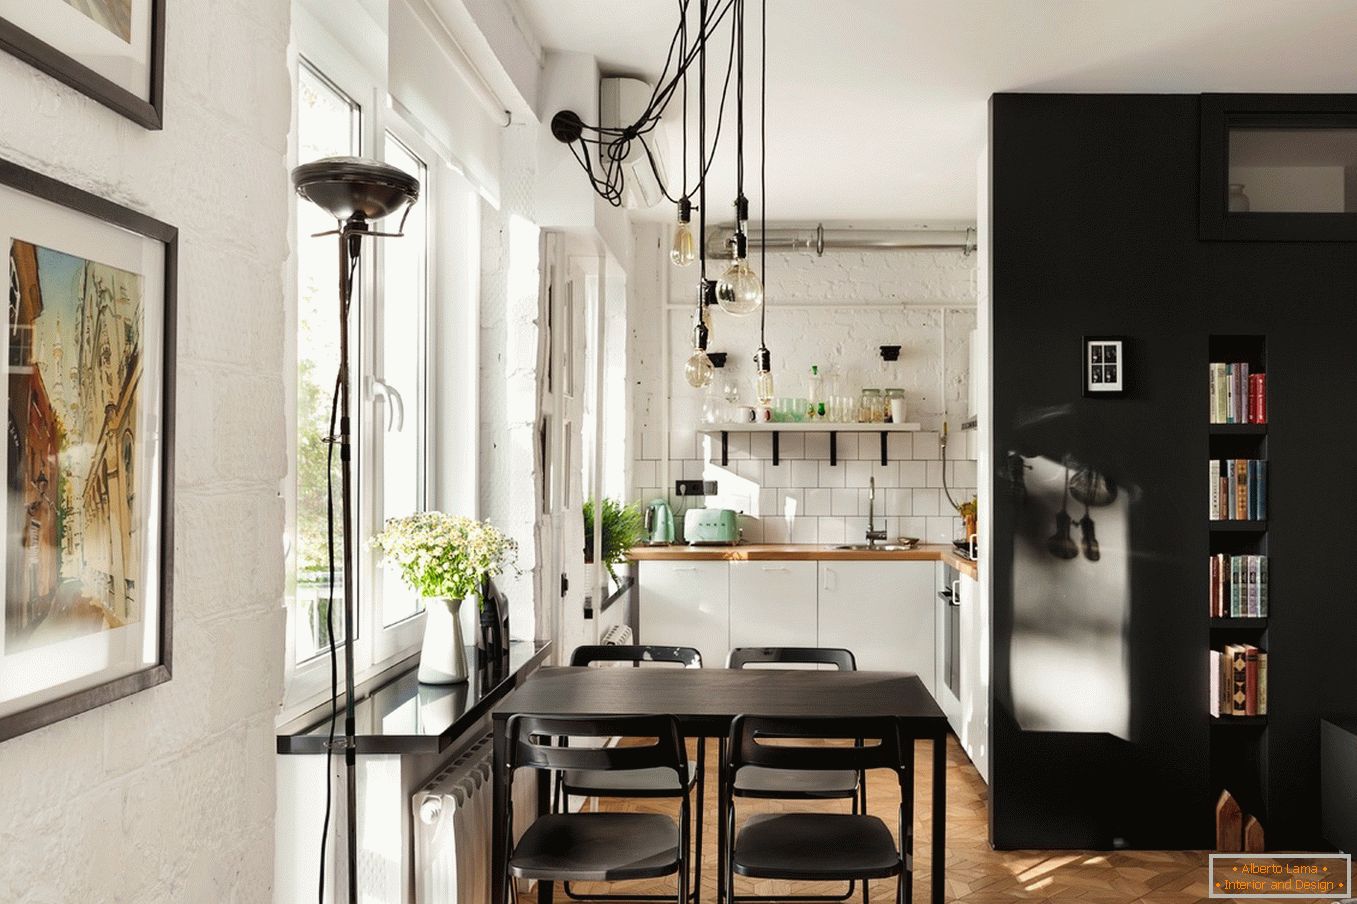 Design of a small kitchen in black and white